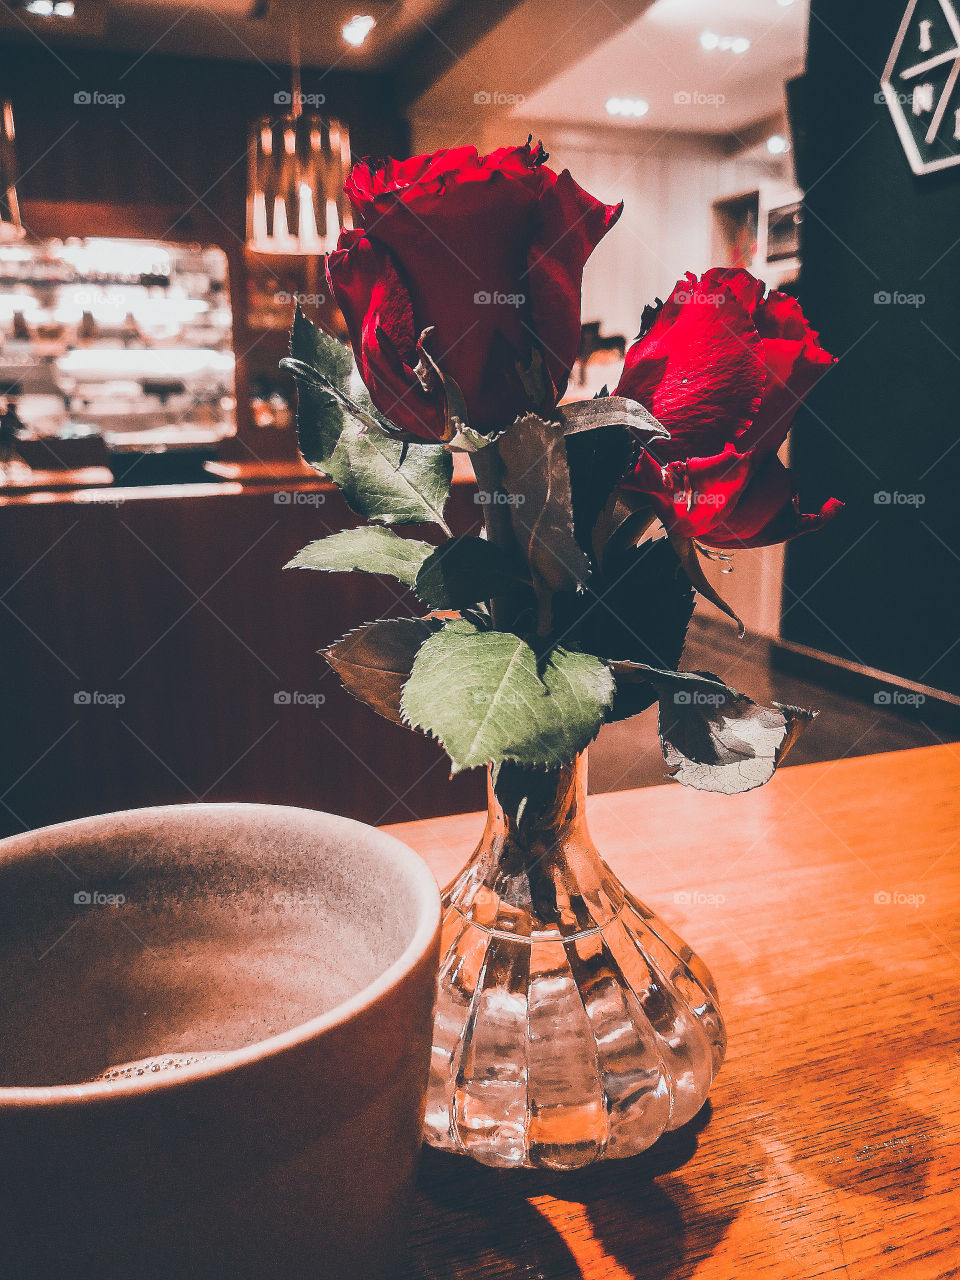 Roses and coffee.